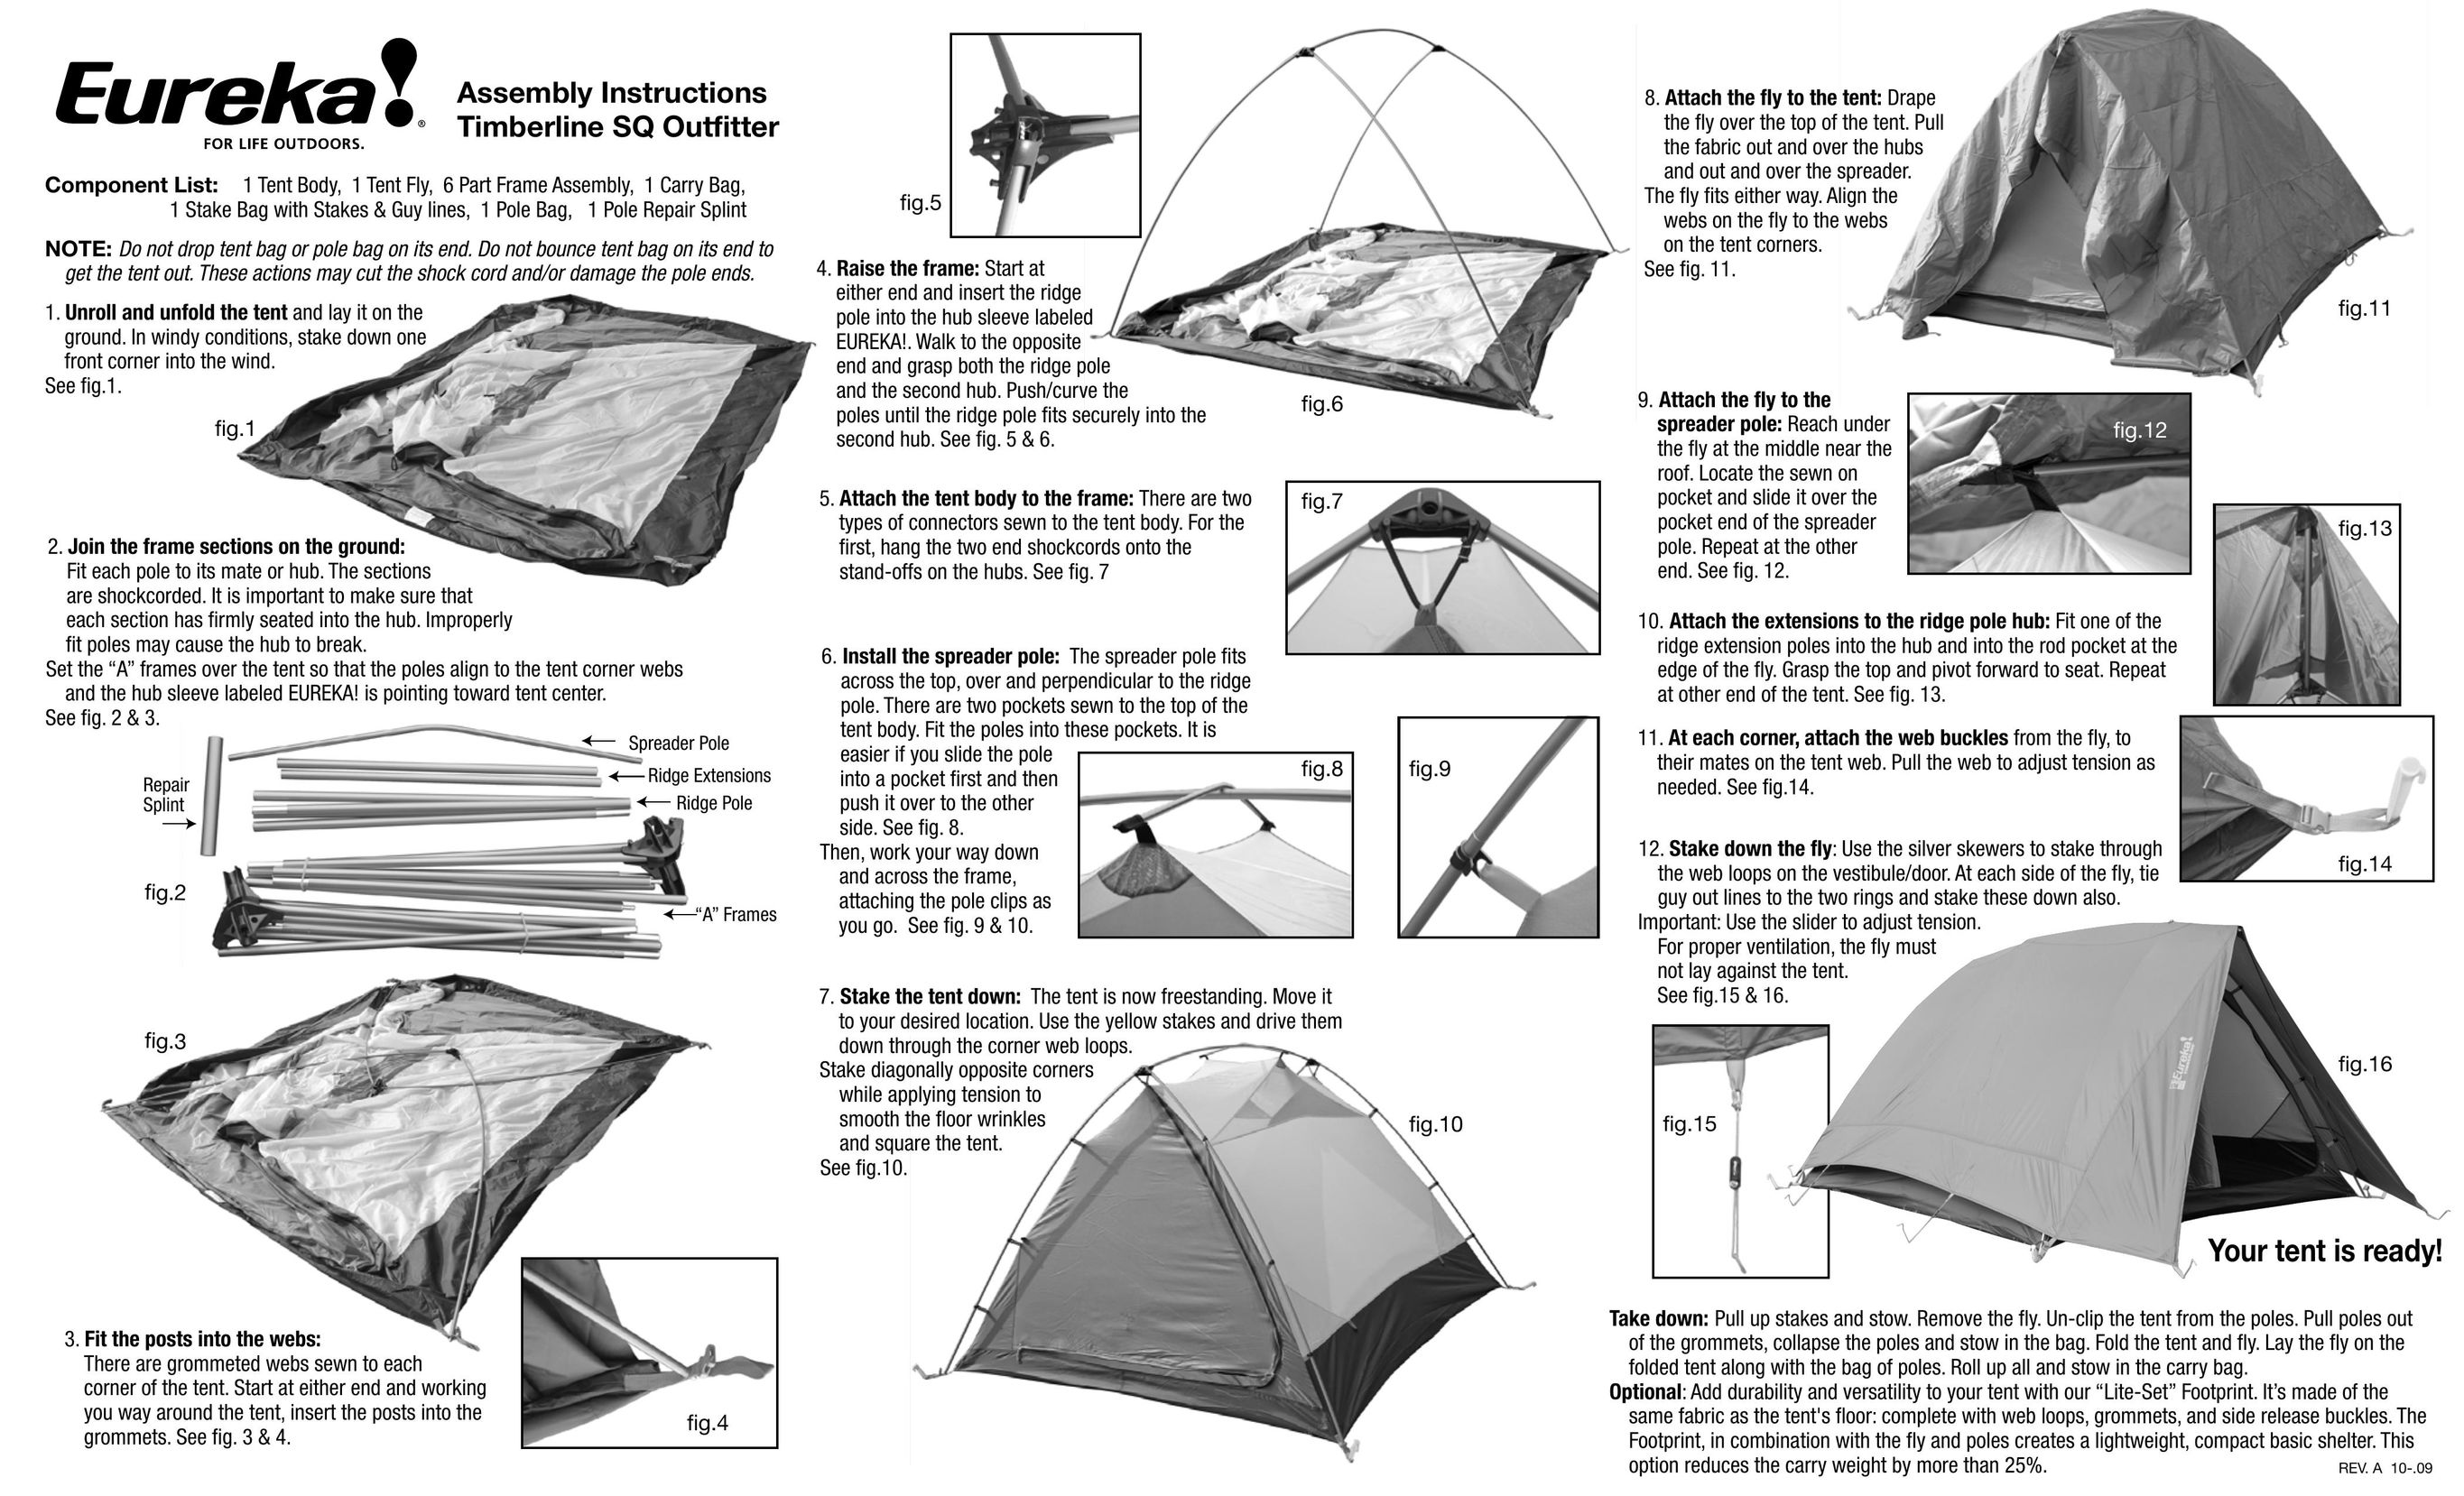 Eureka! Tents Timberline SQ Outfitter Tent User Manual